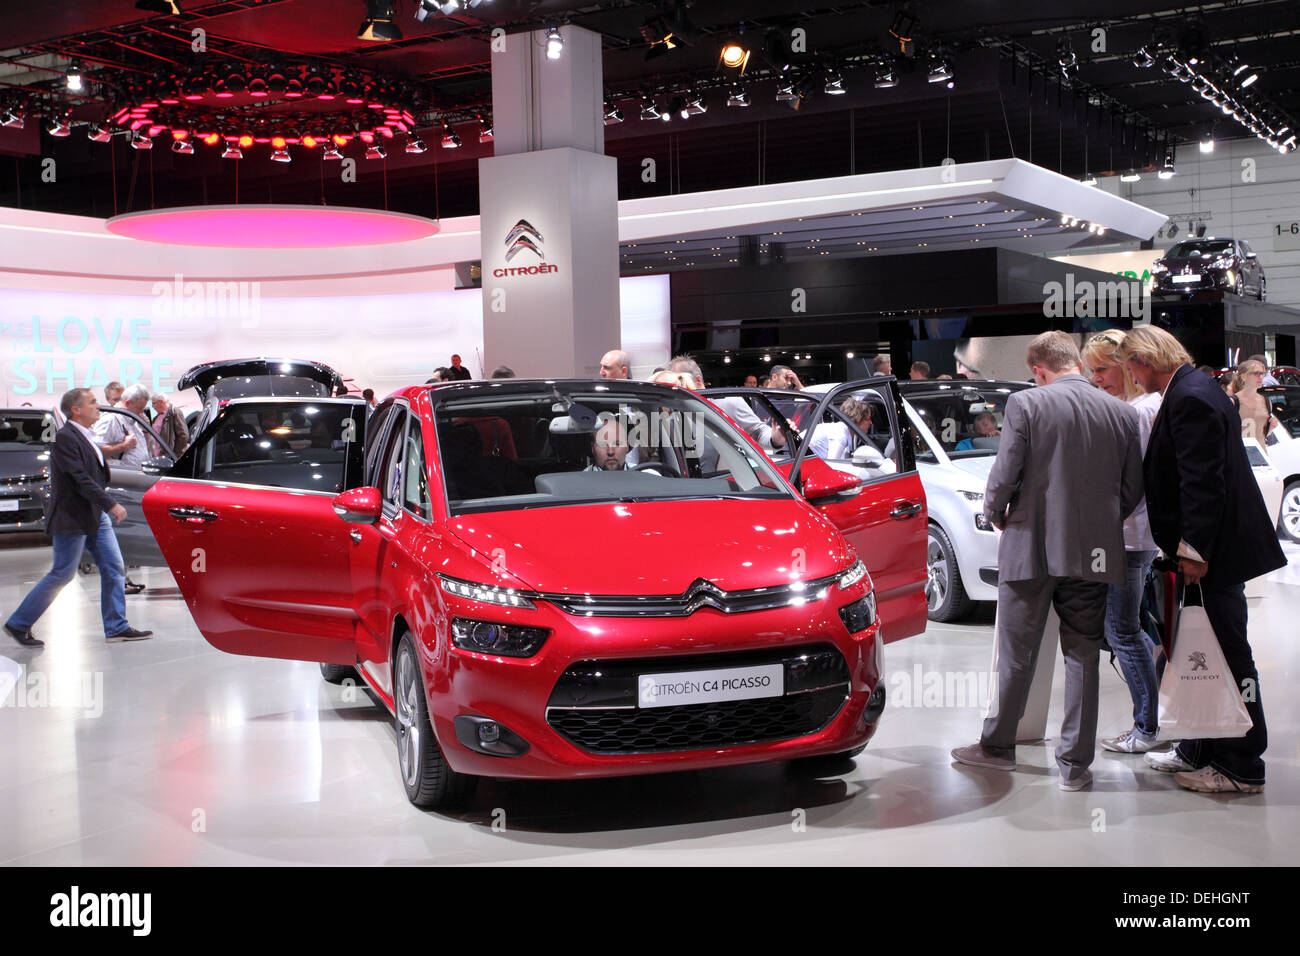 International Motor Show in Frankfurt, Germany. Citroen presenting the new C4 Picasso at the 65th IAA in Frankfurt, Germany Stock Photo